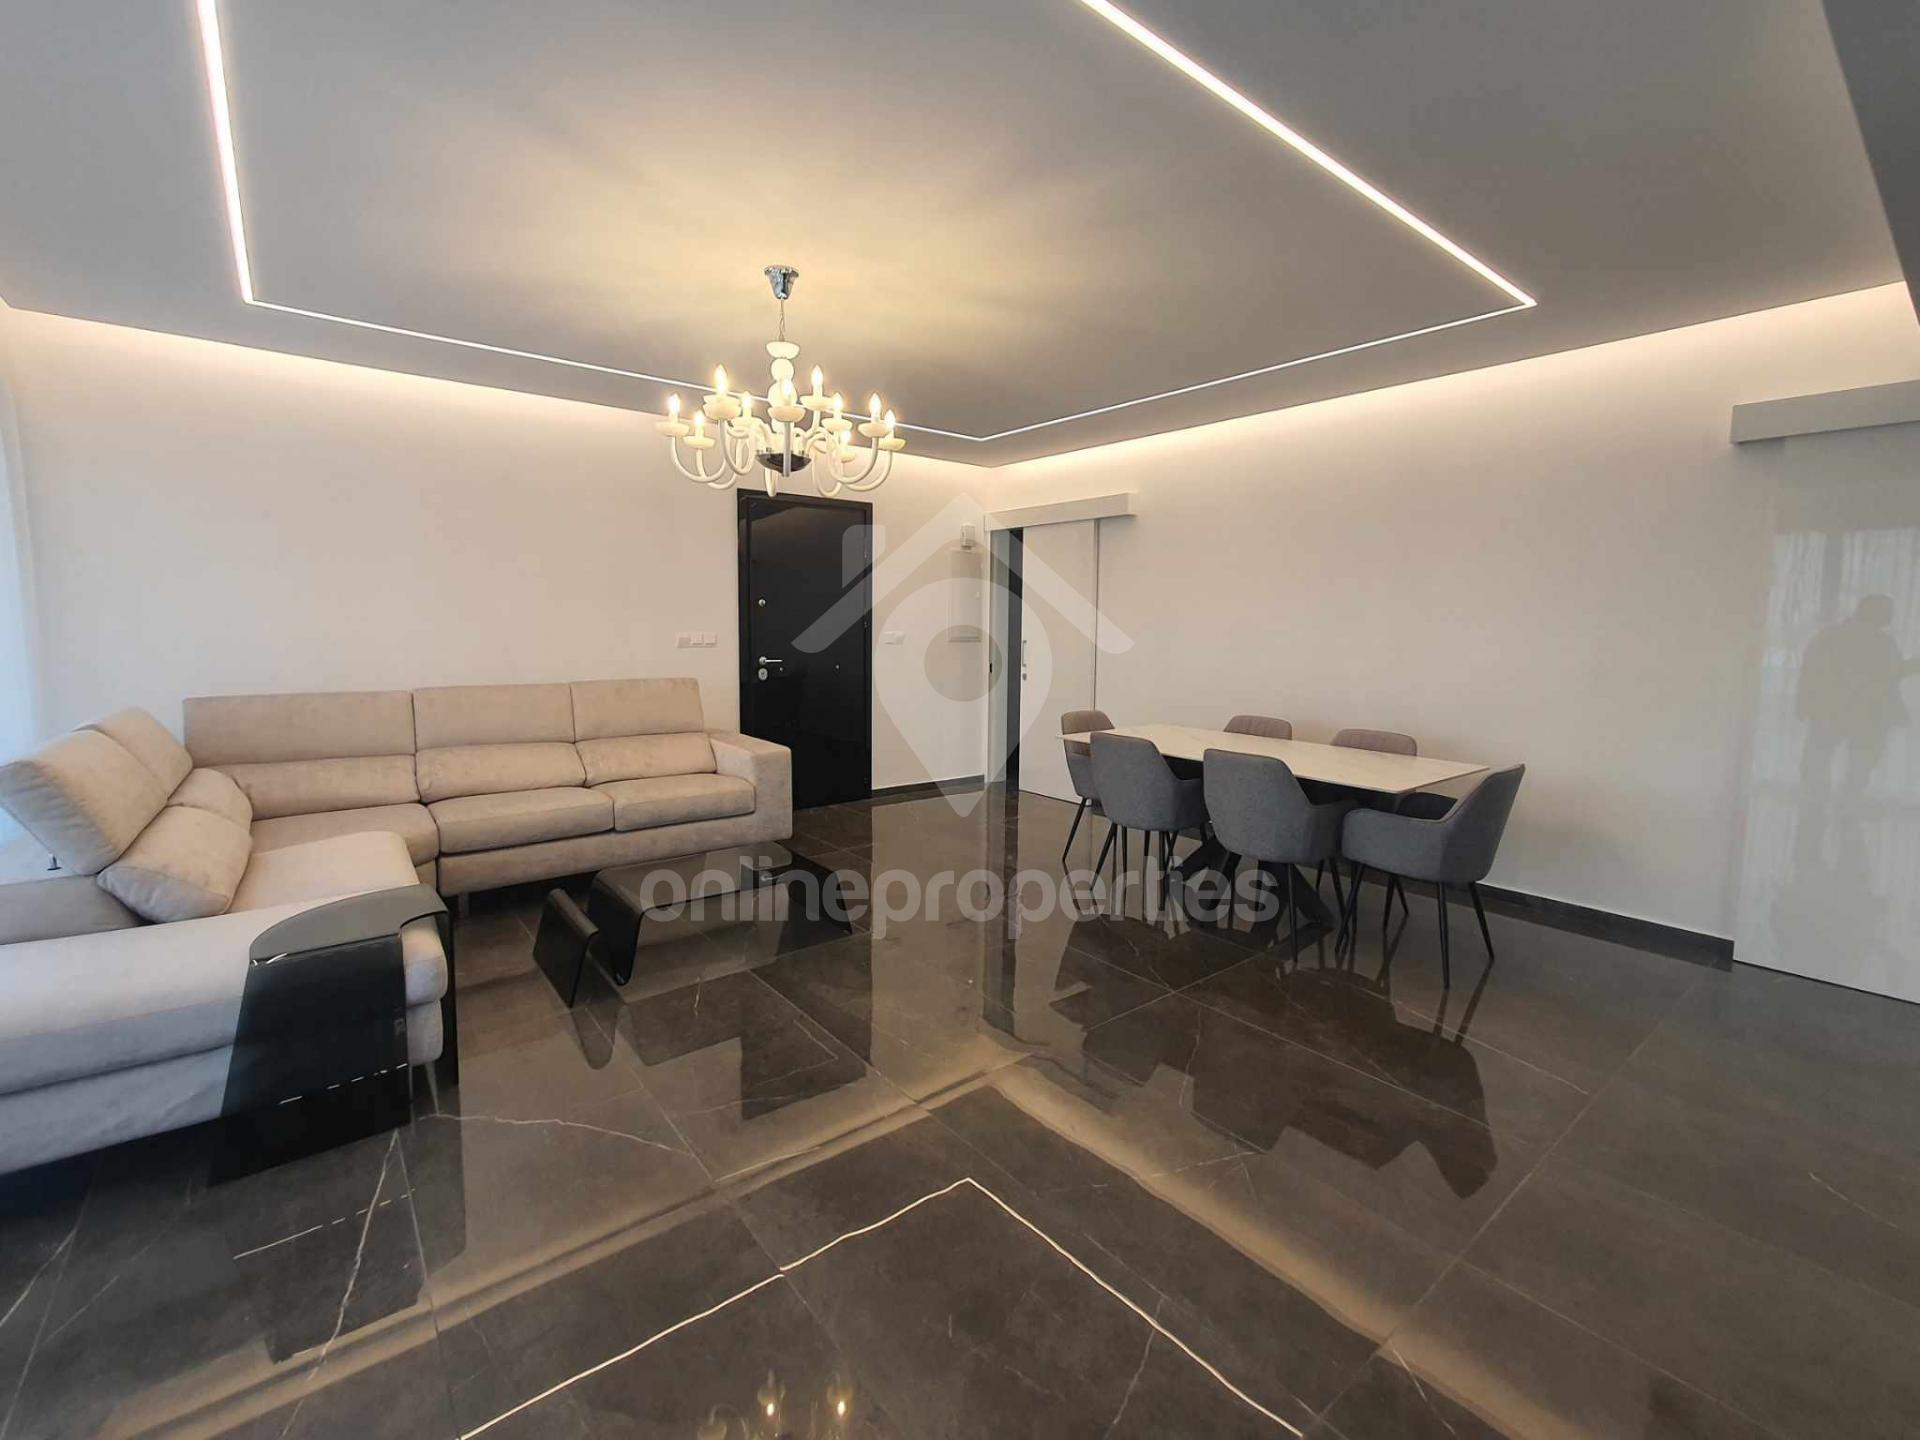 3-bedroom apartment close to the city center